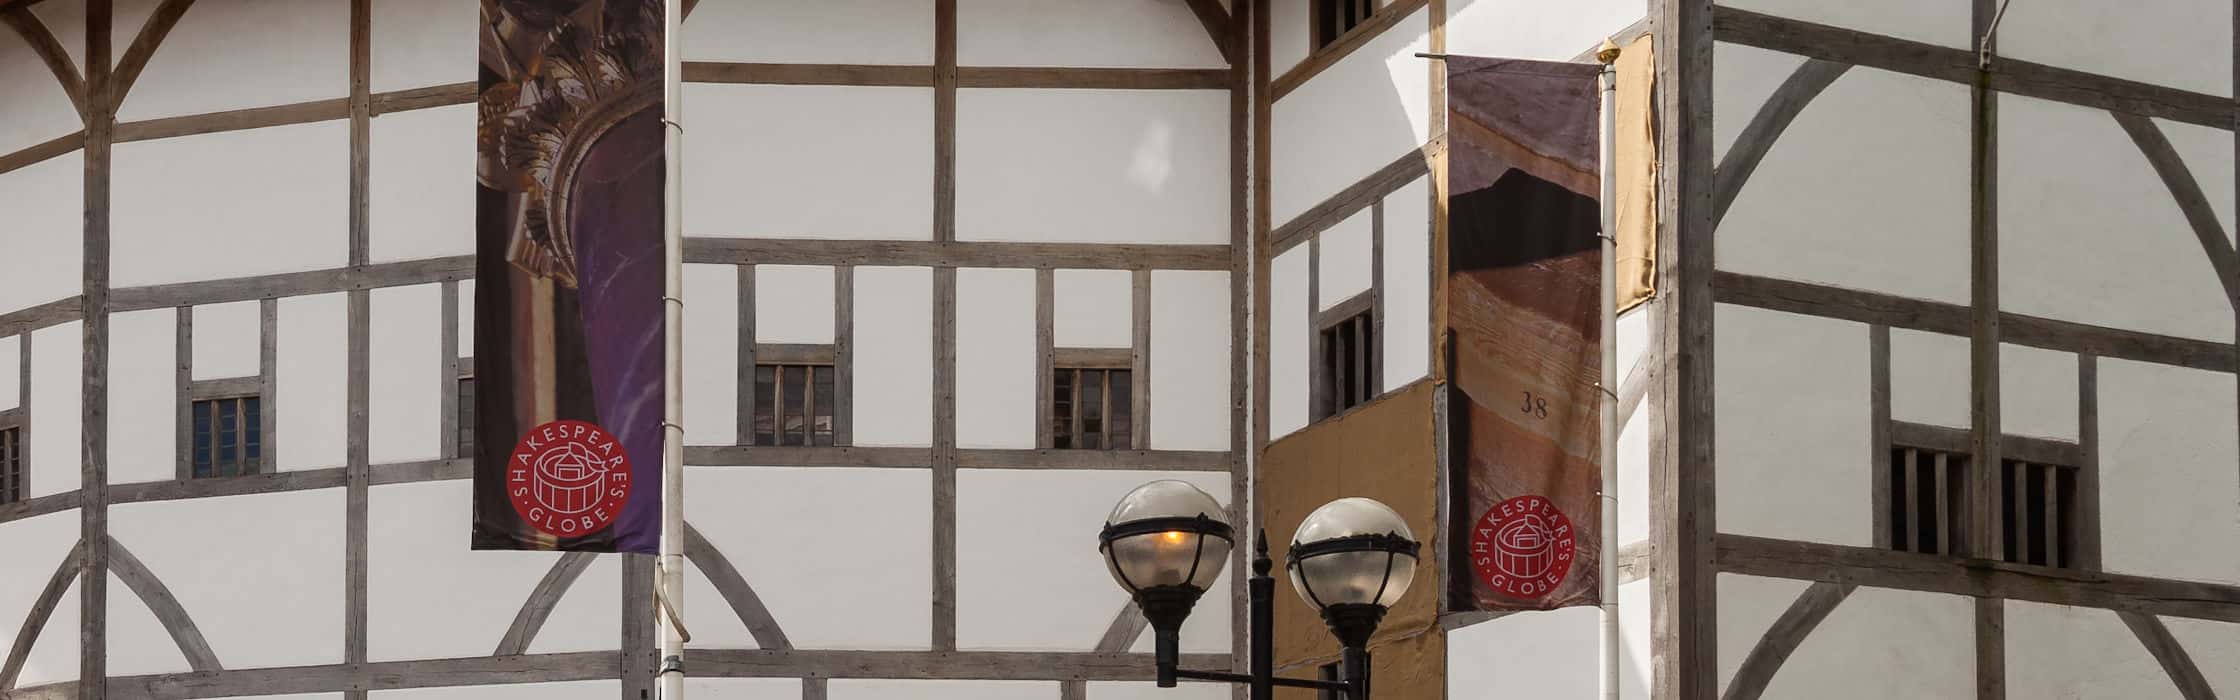 What's On at Shakespeare's Globe, London